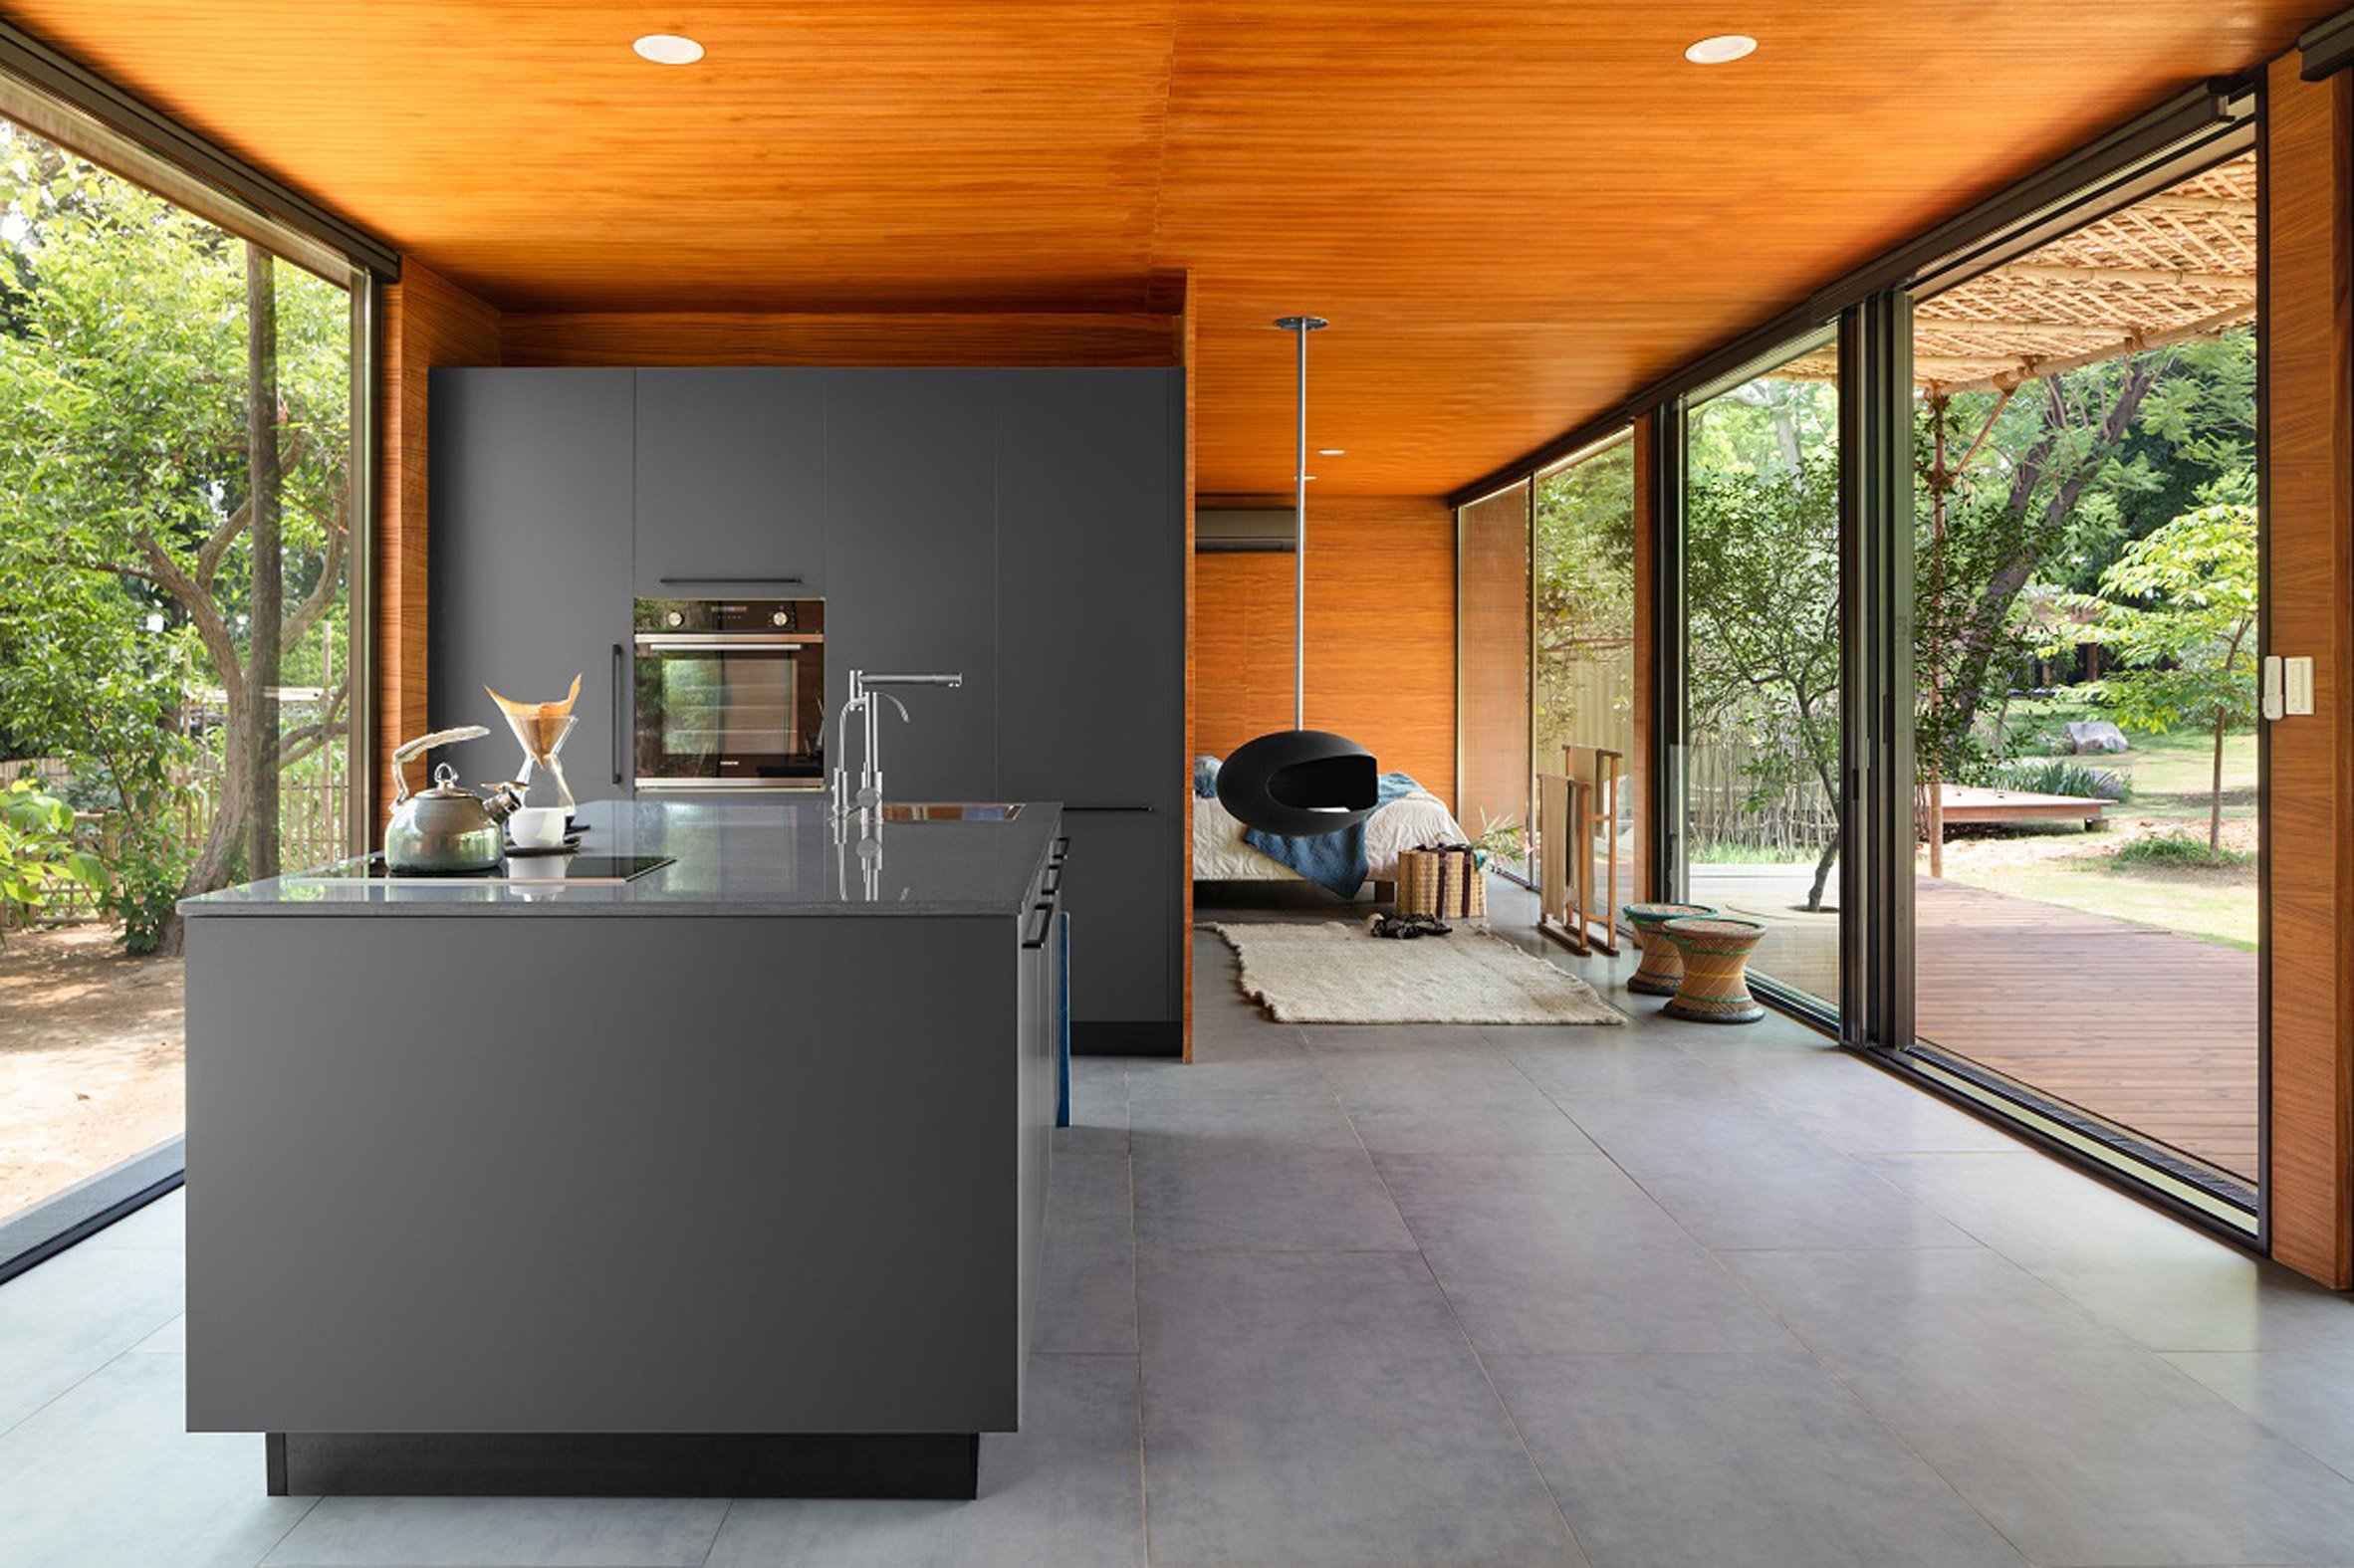 Interior image of a kitchen area at the shipping container home